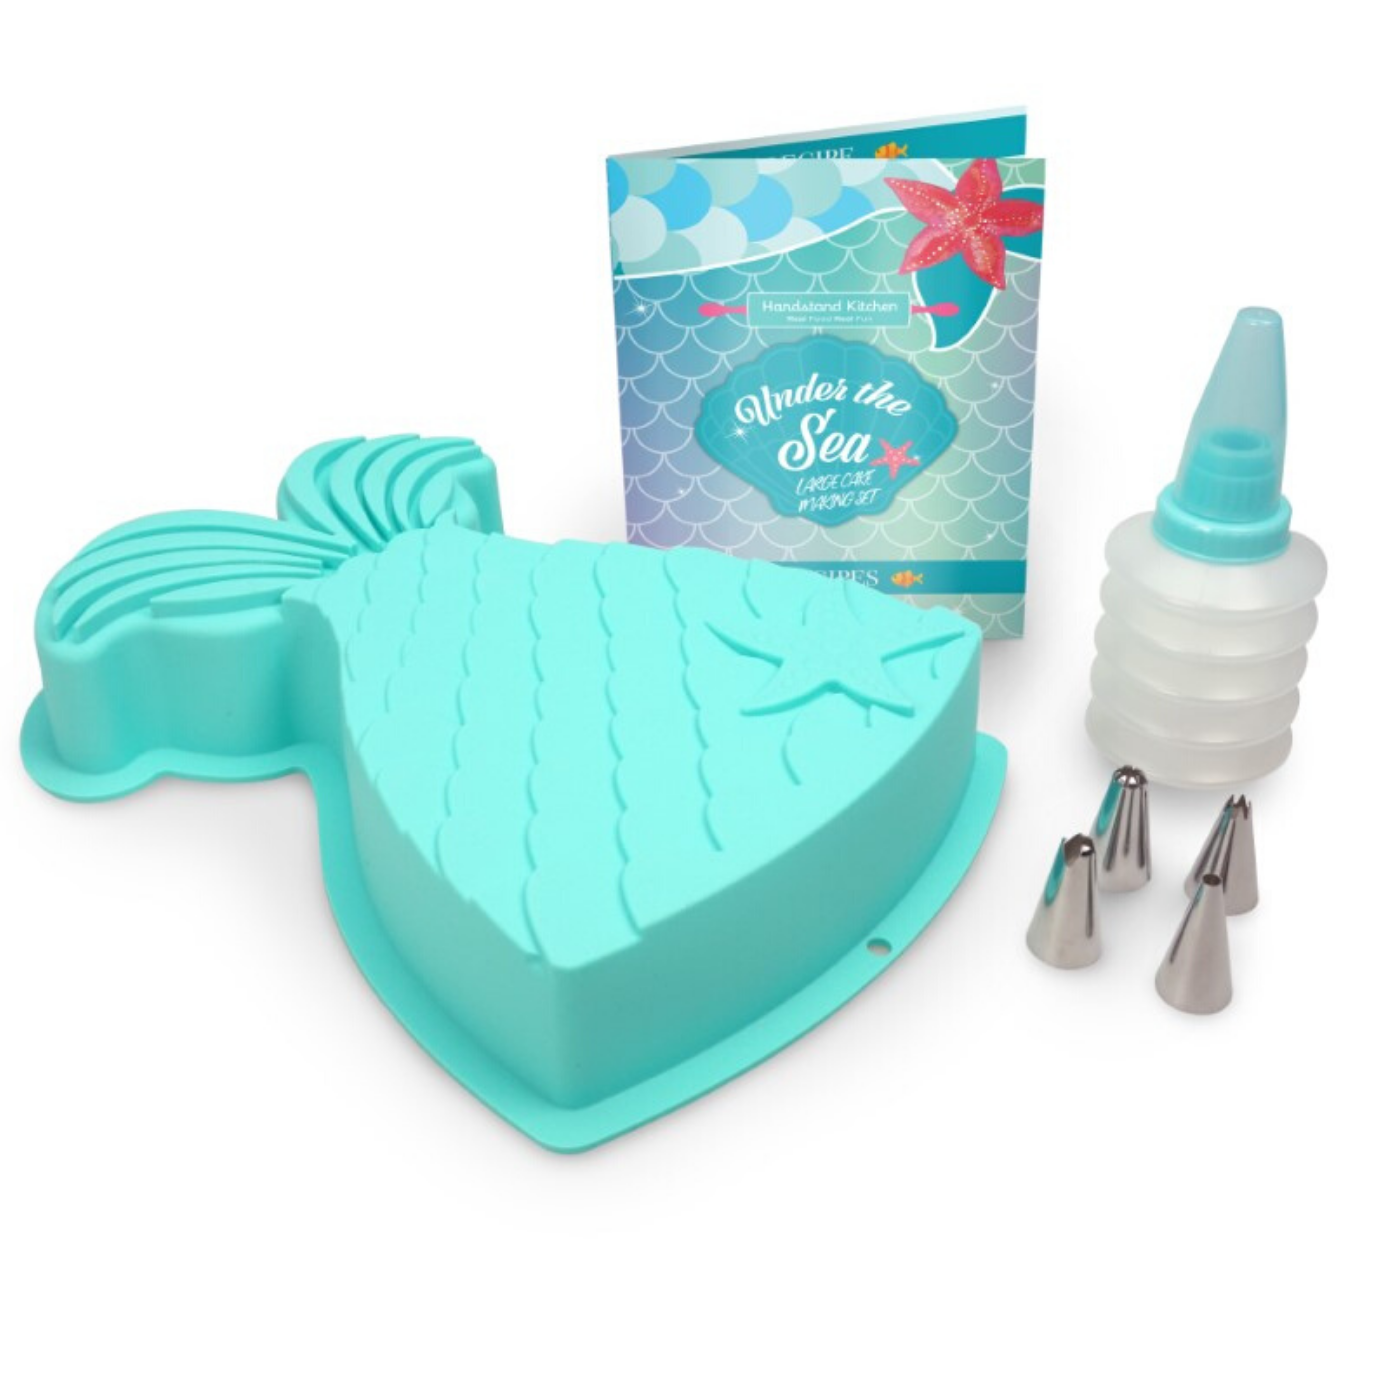 Out of box image of Under the Sea Mermaid Silicone Baking Mold and Recipes and Frosting